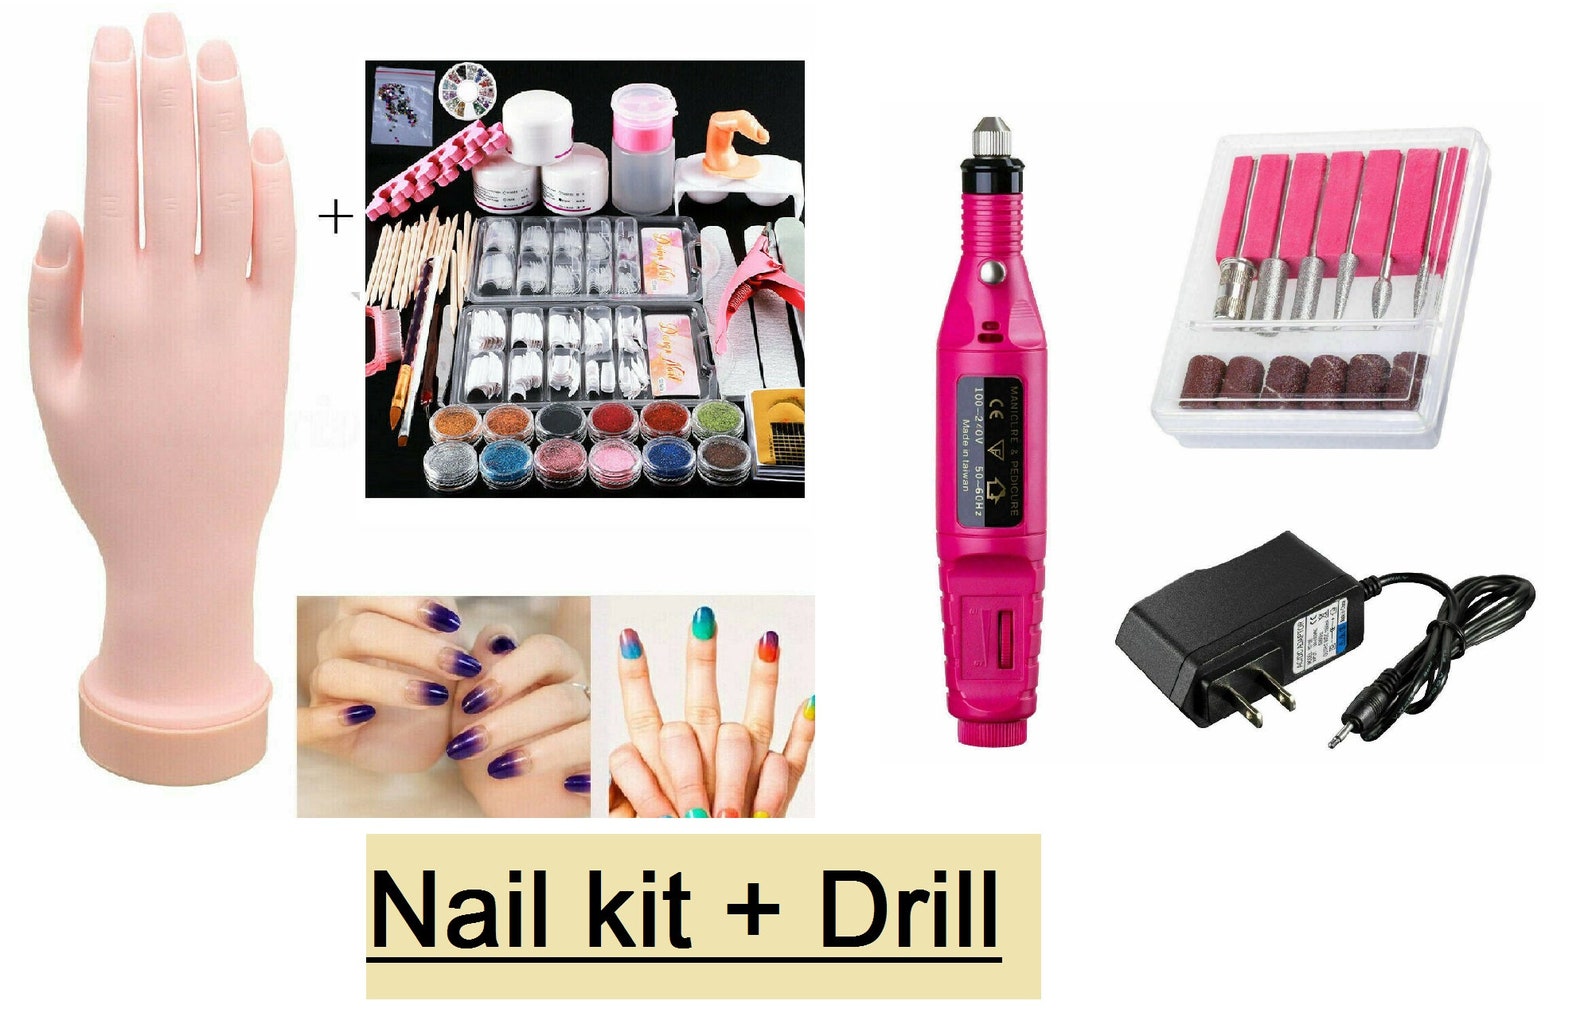 2. The Best Nail Drill Bits for Acrylic Nails - wide 4